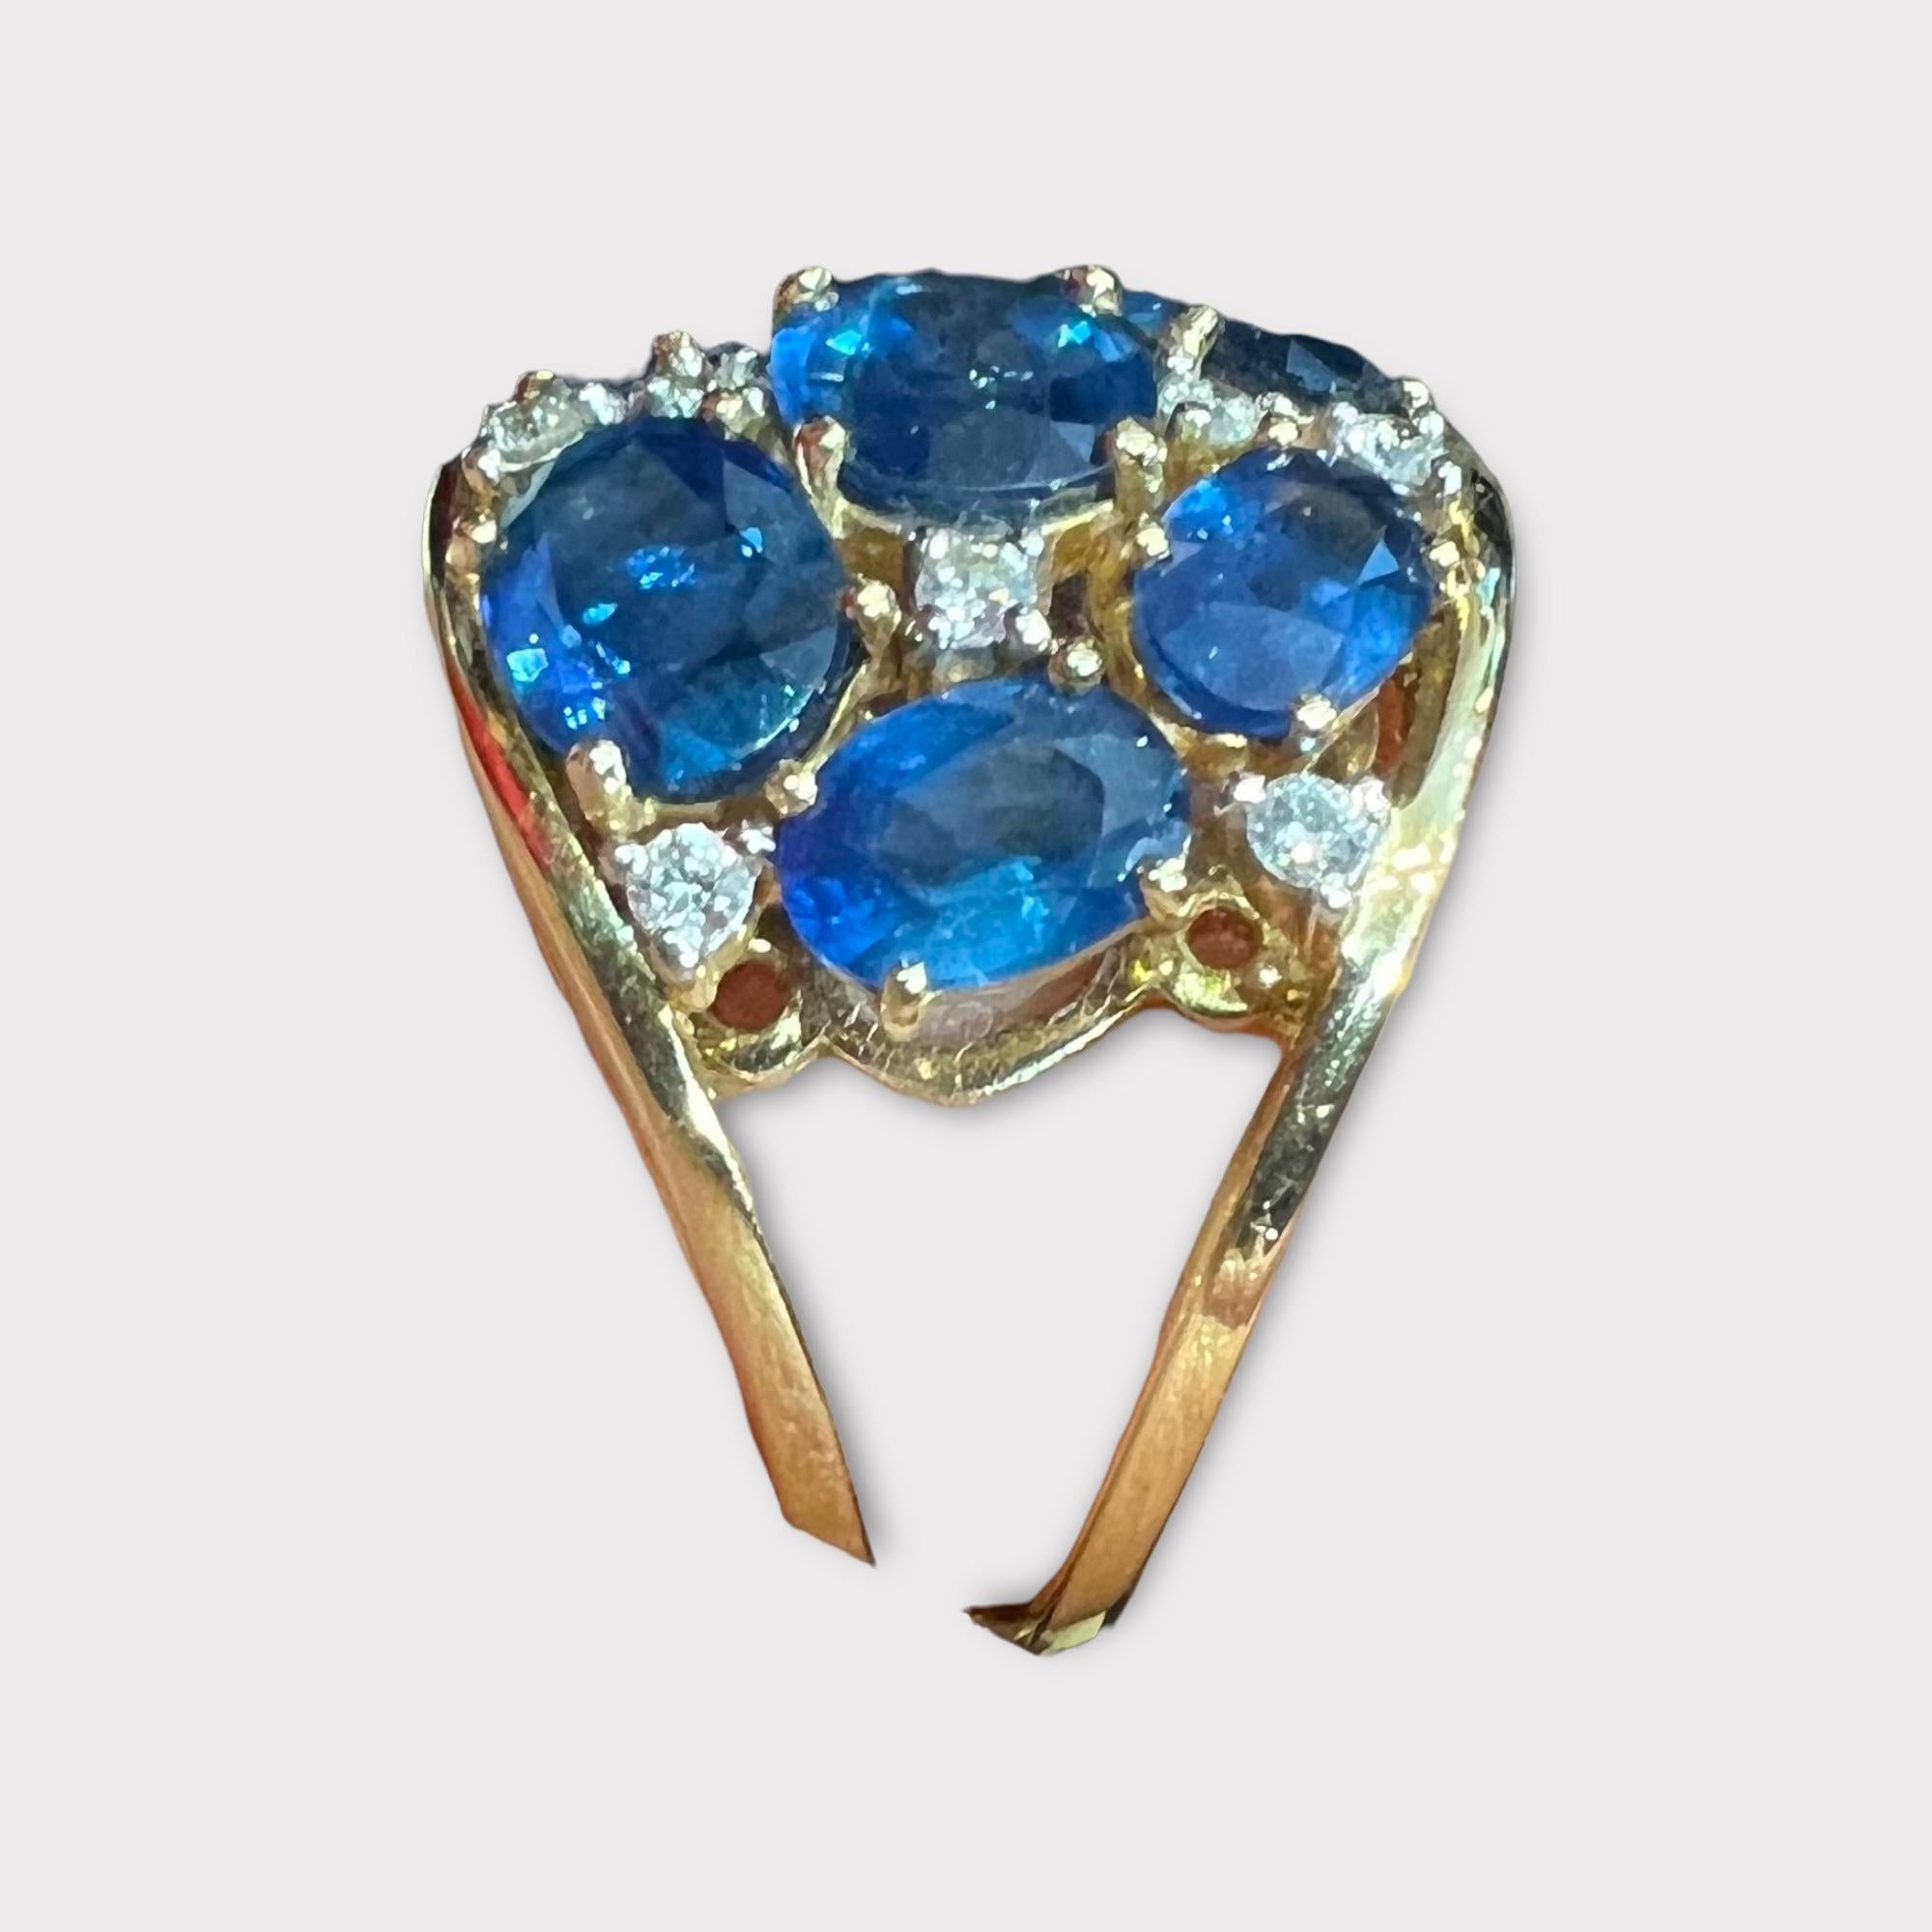 Oval Cut 6, 19 Carat of Blue Saphirs and Diamonds, 18 Carat Gold Cocktail Ring